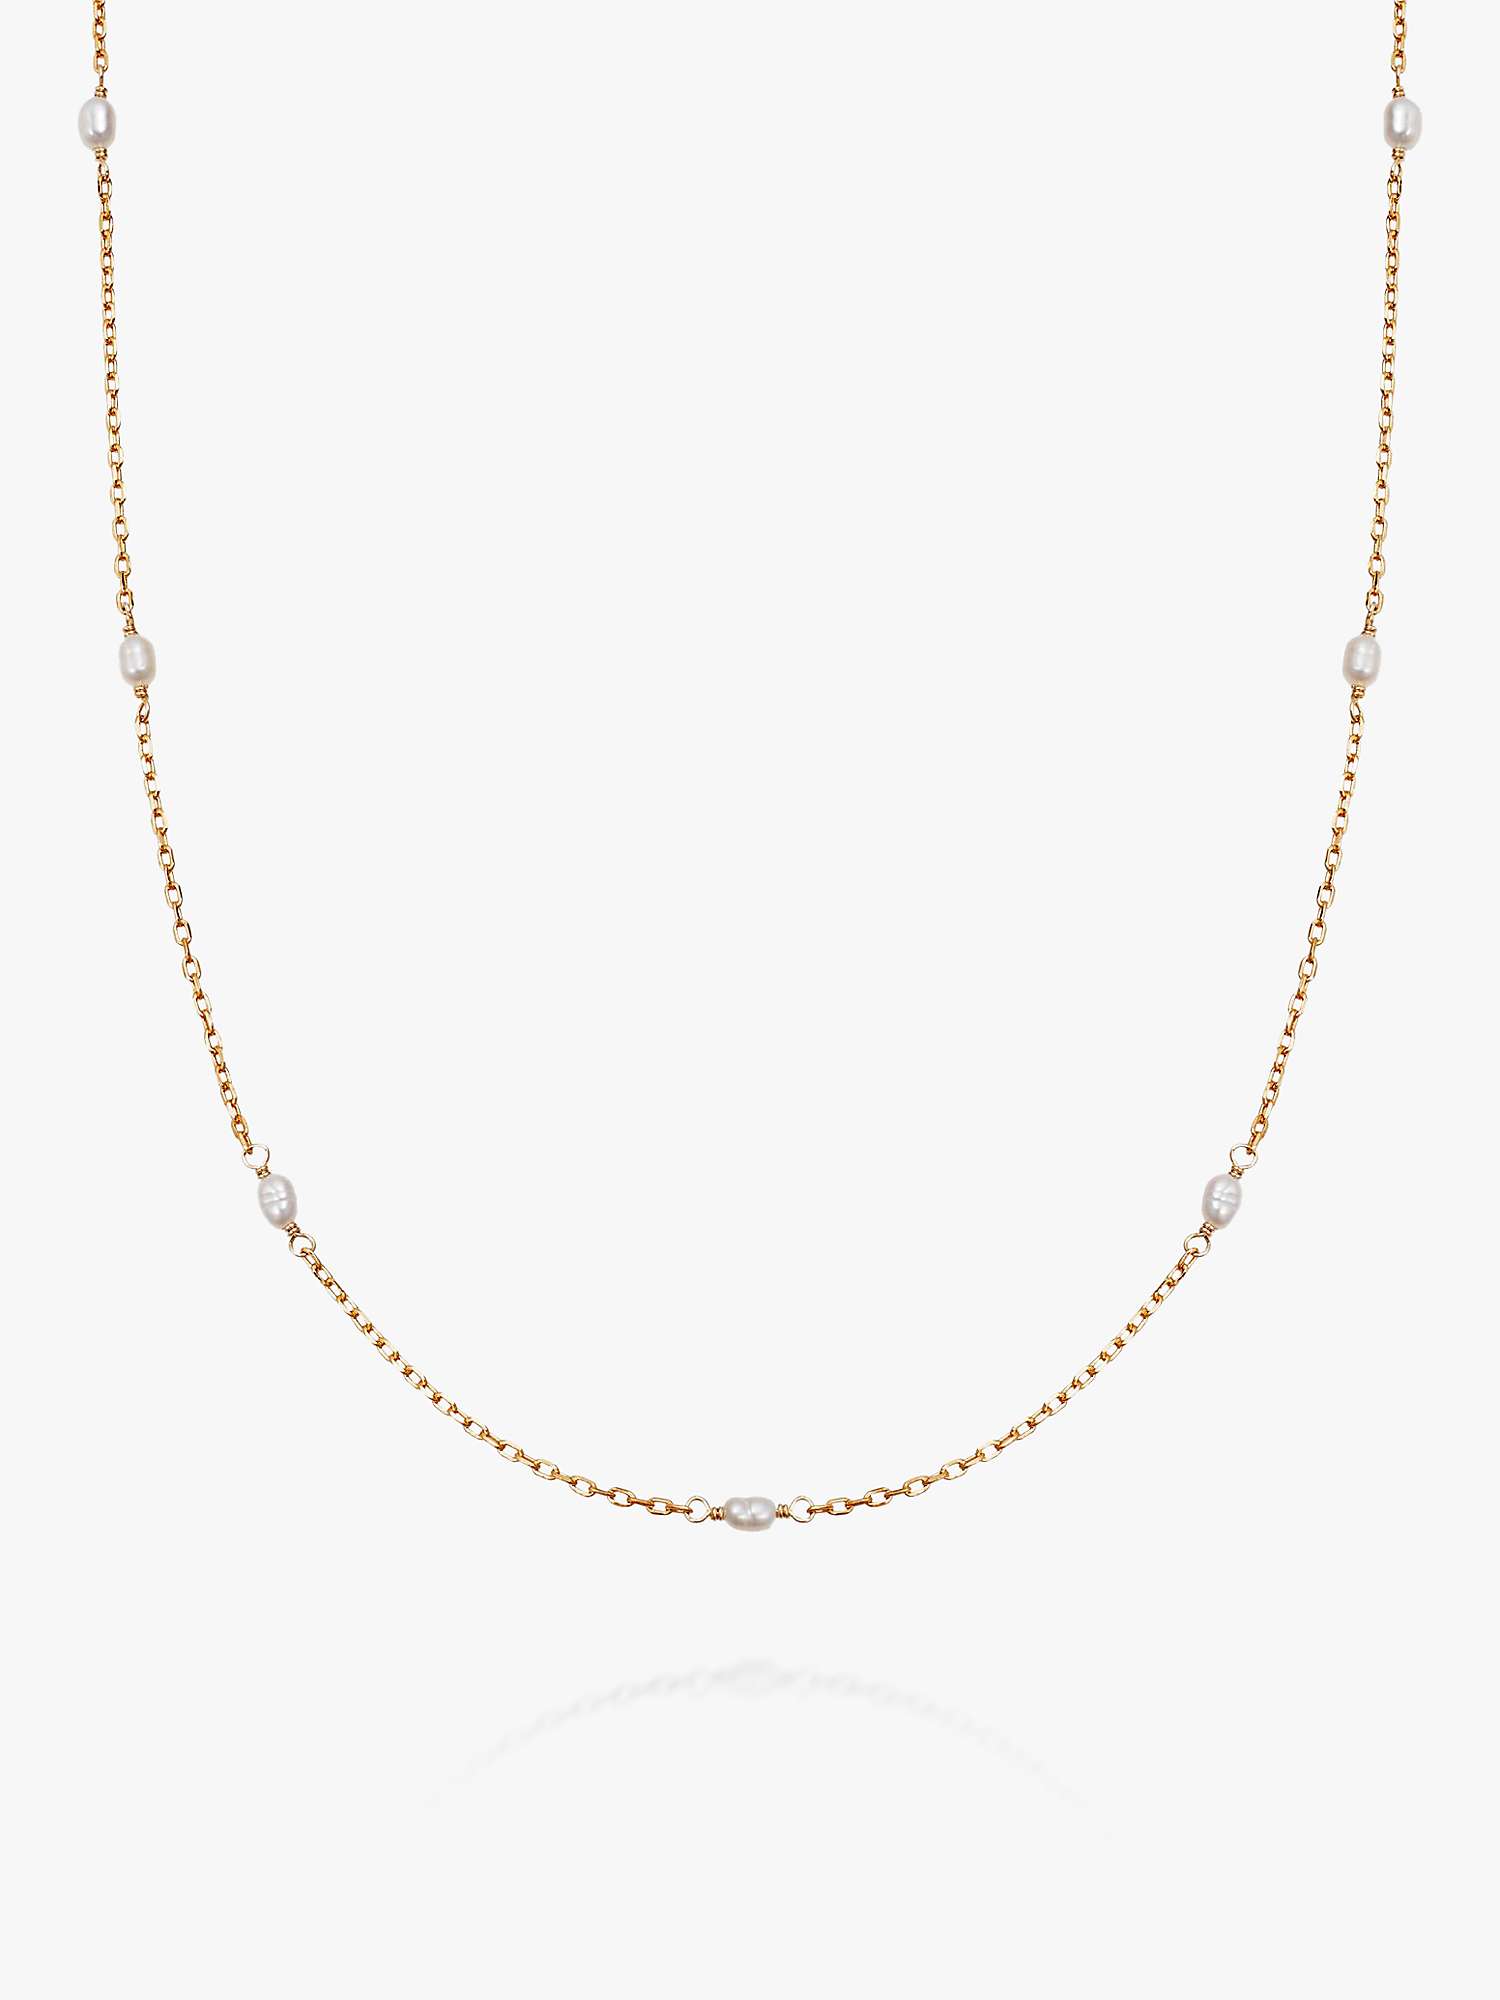 Buy Daisy London Freshwater Seed Pearl Chain Necklace, Gold/White Online at johnlewis.com